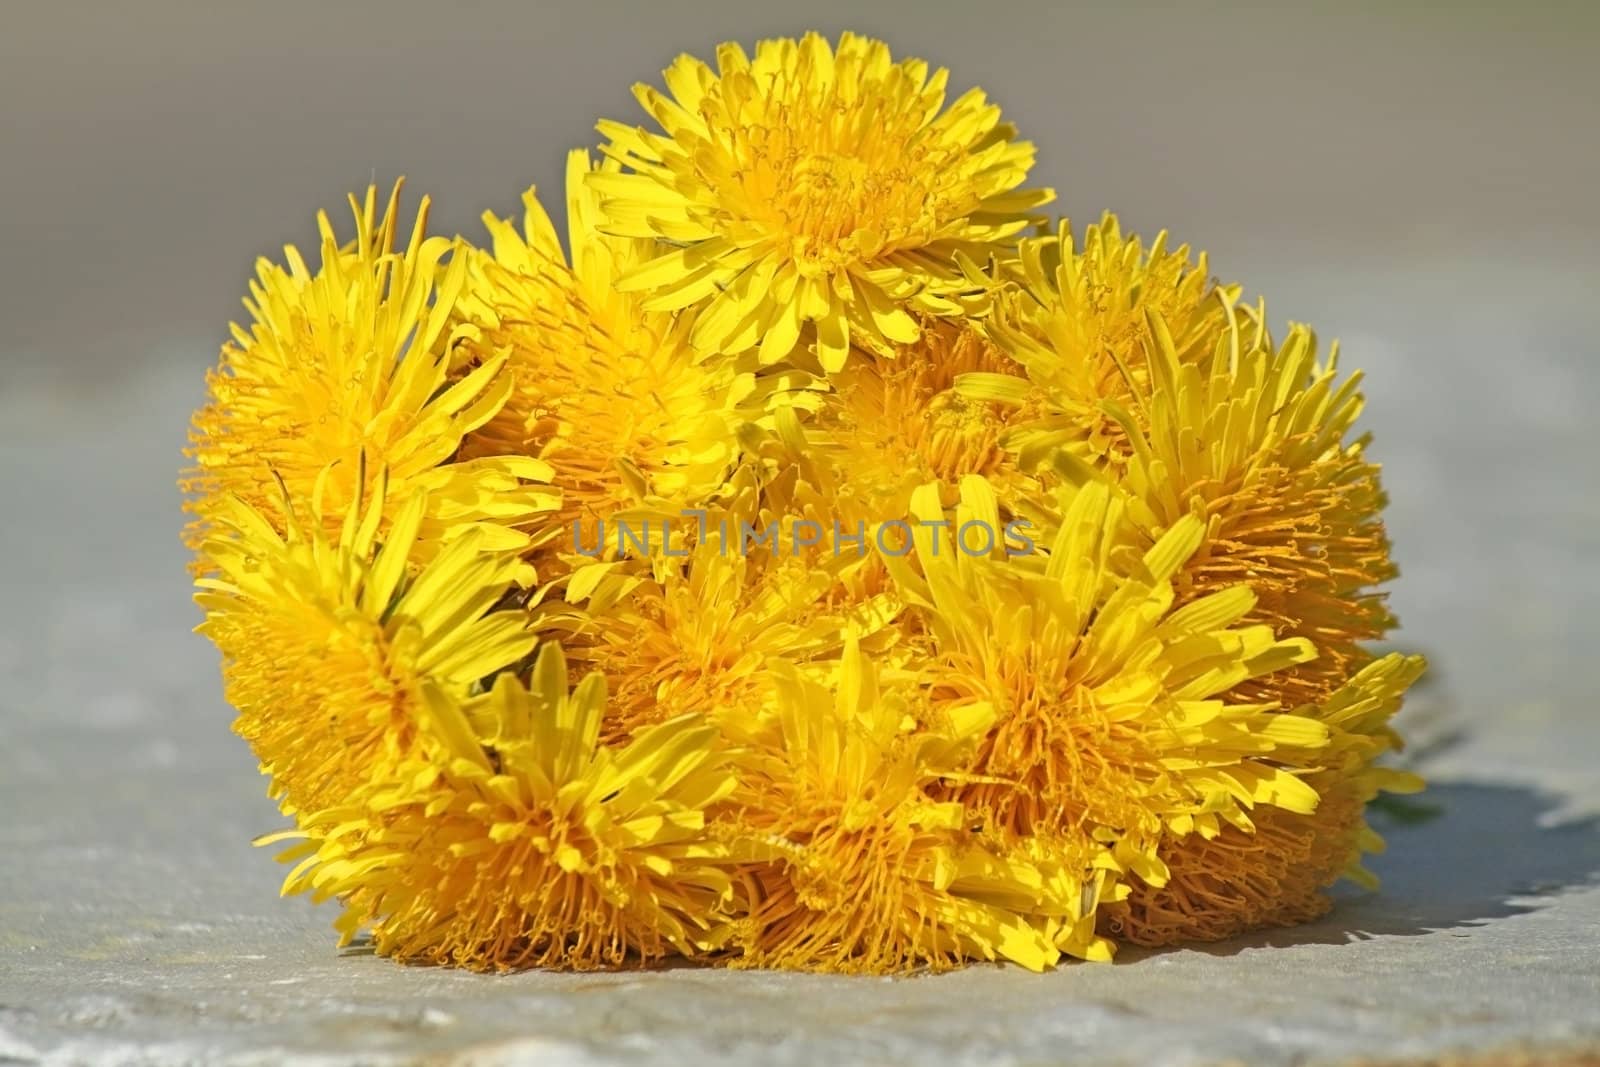 A bouquet of many beautiful yellow dandelions